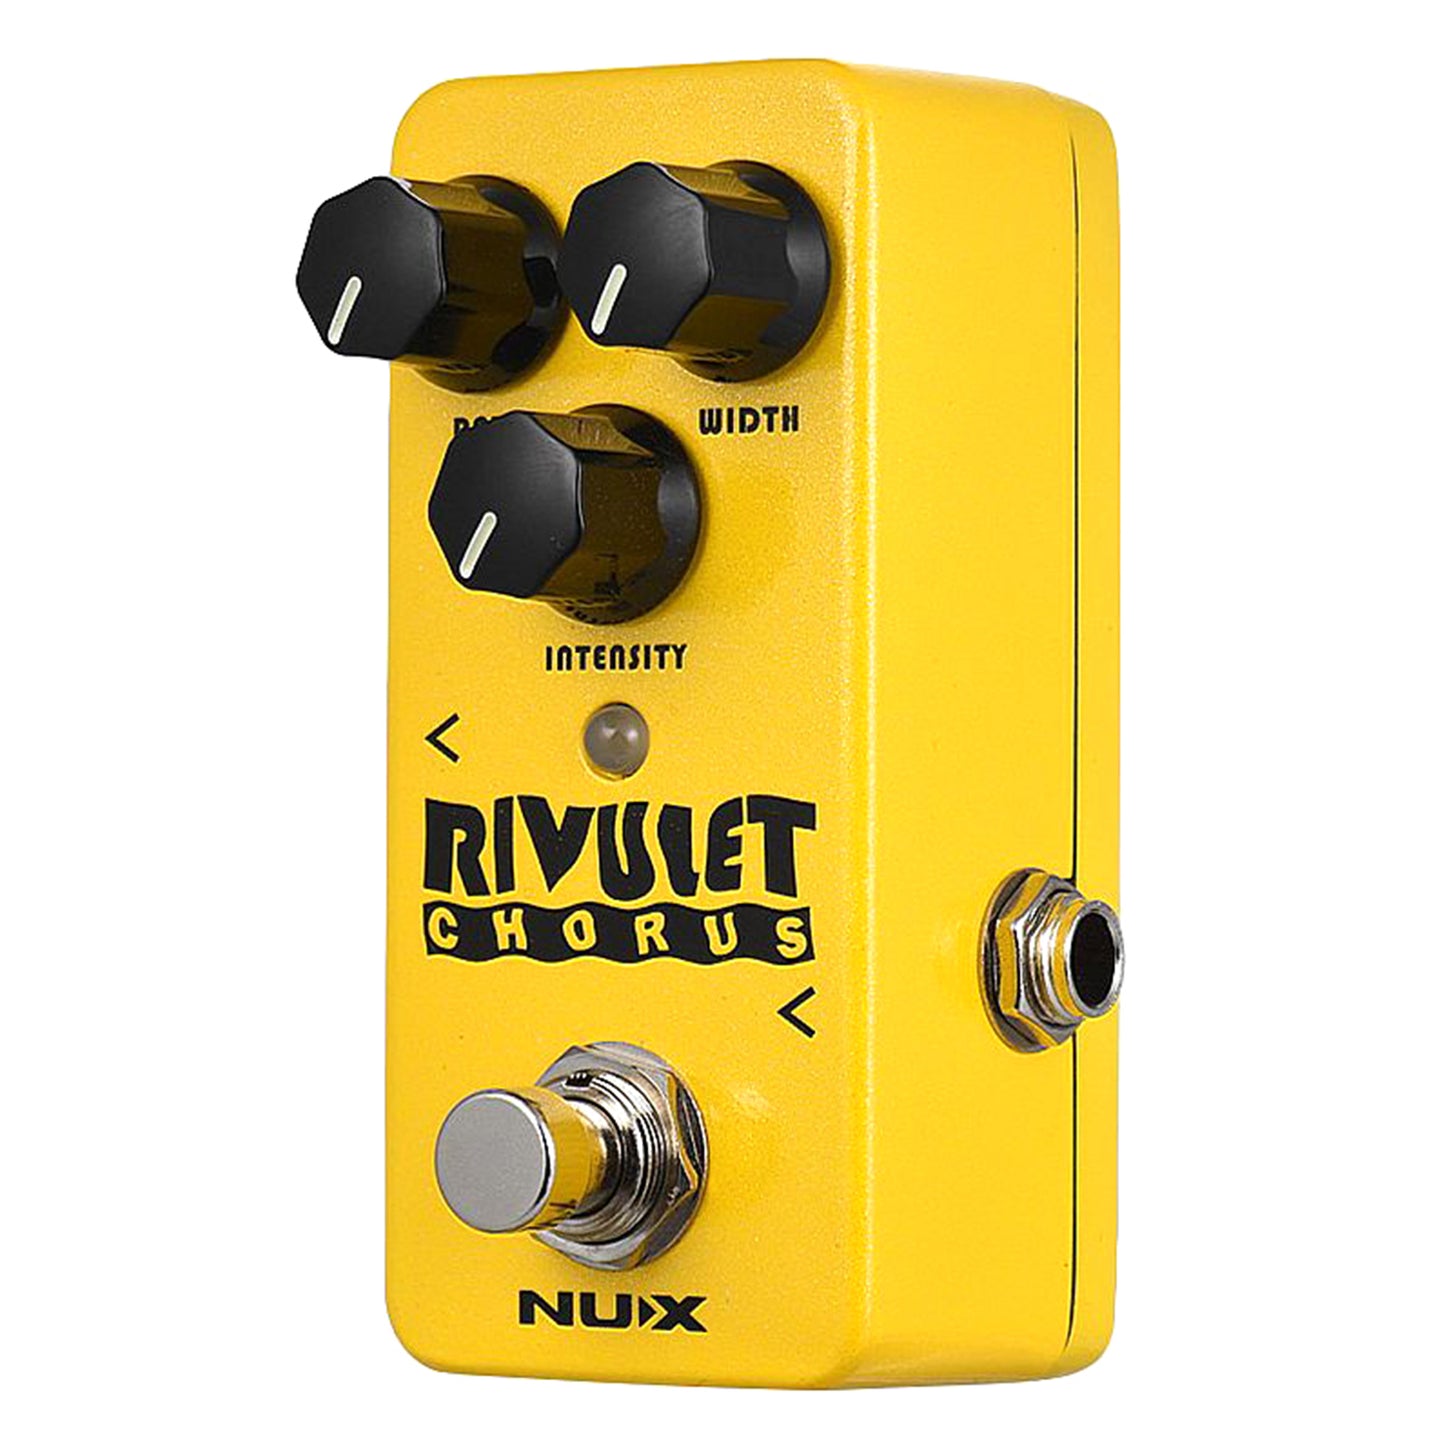 NUX Rivulet Chorus Mini Guitar Effects Pedal with Vintage / Modern Styles, Low Noise, Micro USB Port (NCH-2)